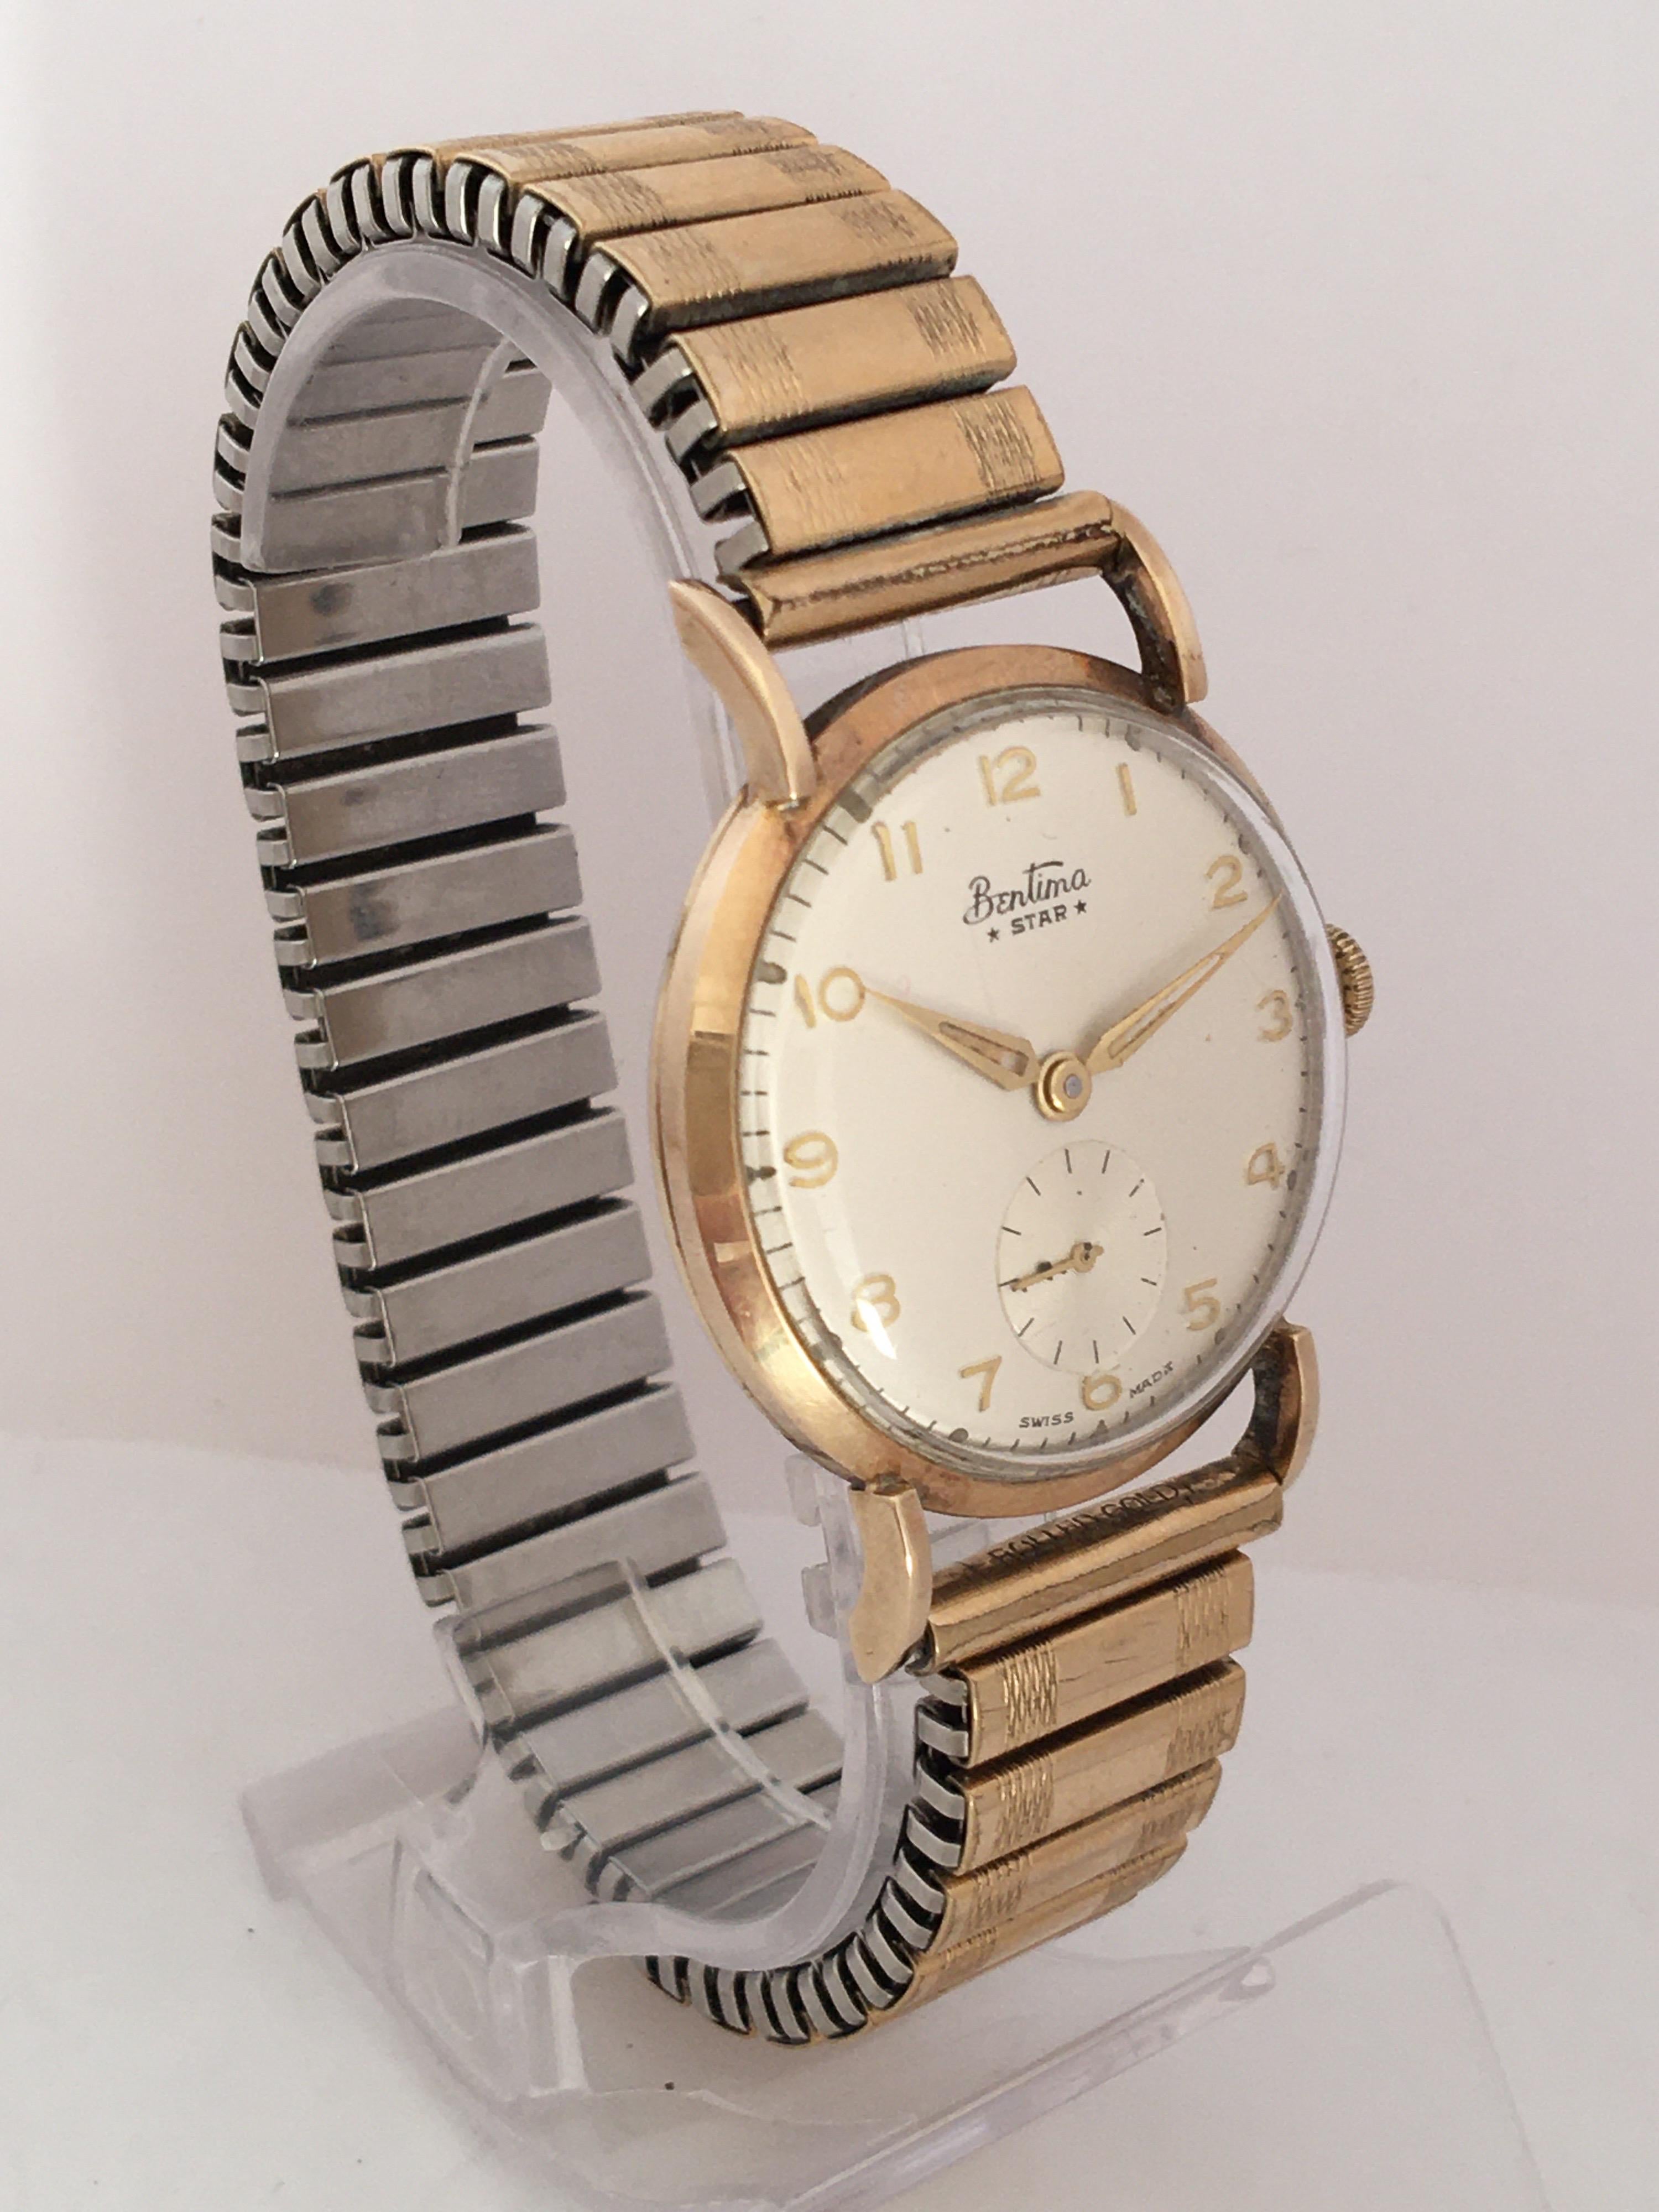 This beautiful pre-owned manual winding vintage Gold watch and Rolled Gold/ Stainless Steel bracelets is working and it is ticking well. The watch shows a gentle used and ageing with tiny scratches on the case and some  tarnished on the winder and